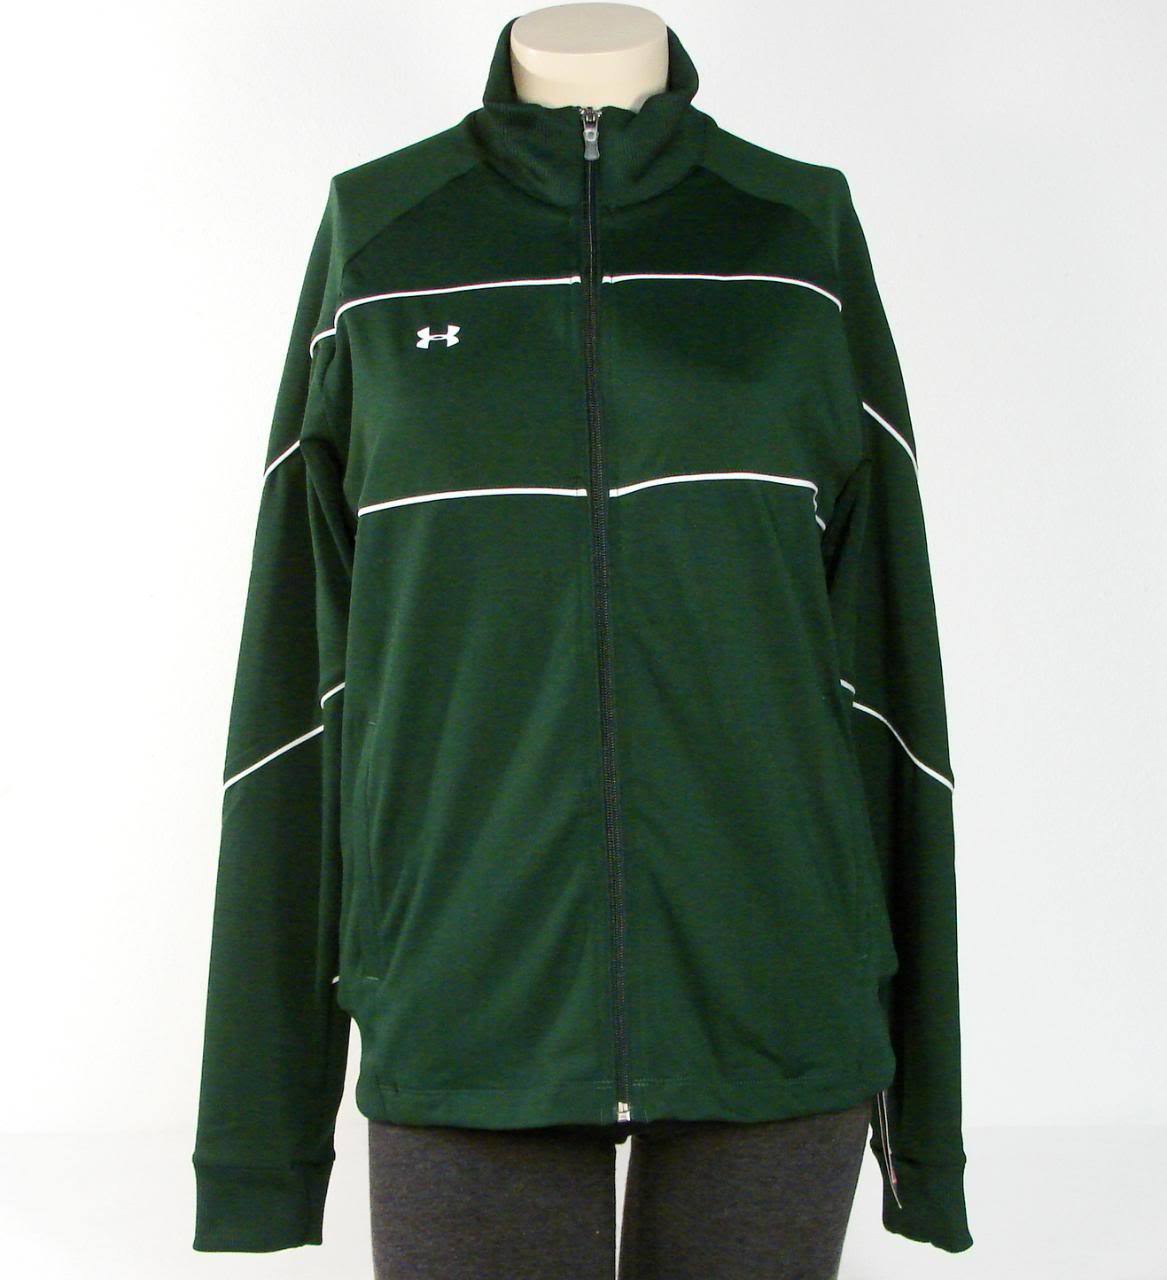 Under Armour All Season Gear Mesh Lined Green Stretch Track Jacket Women's  NWT - $69.99